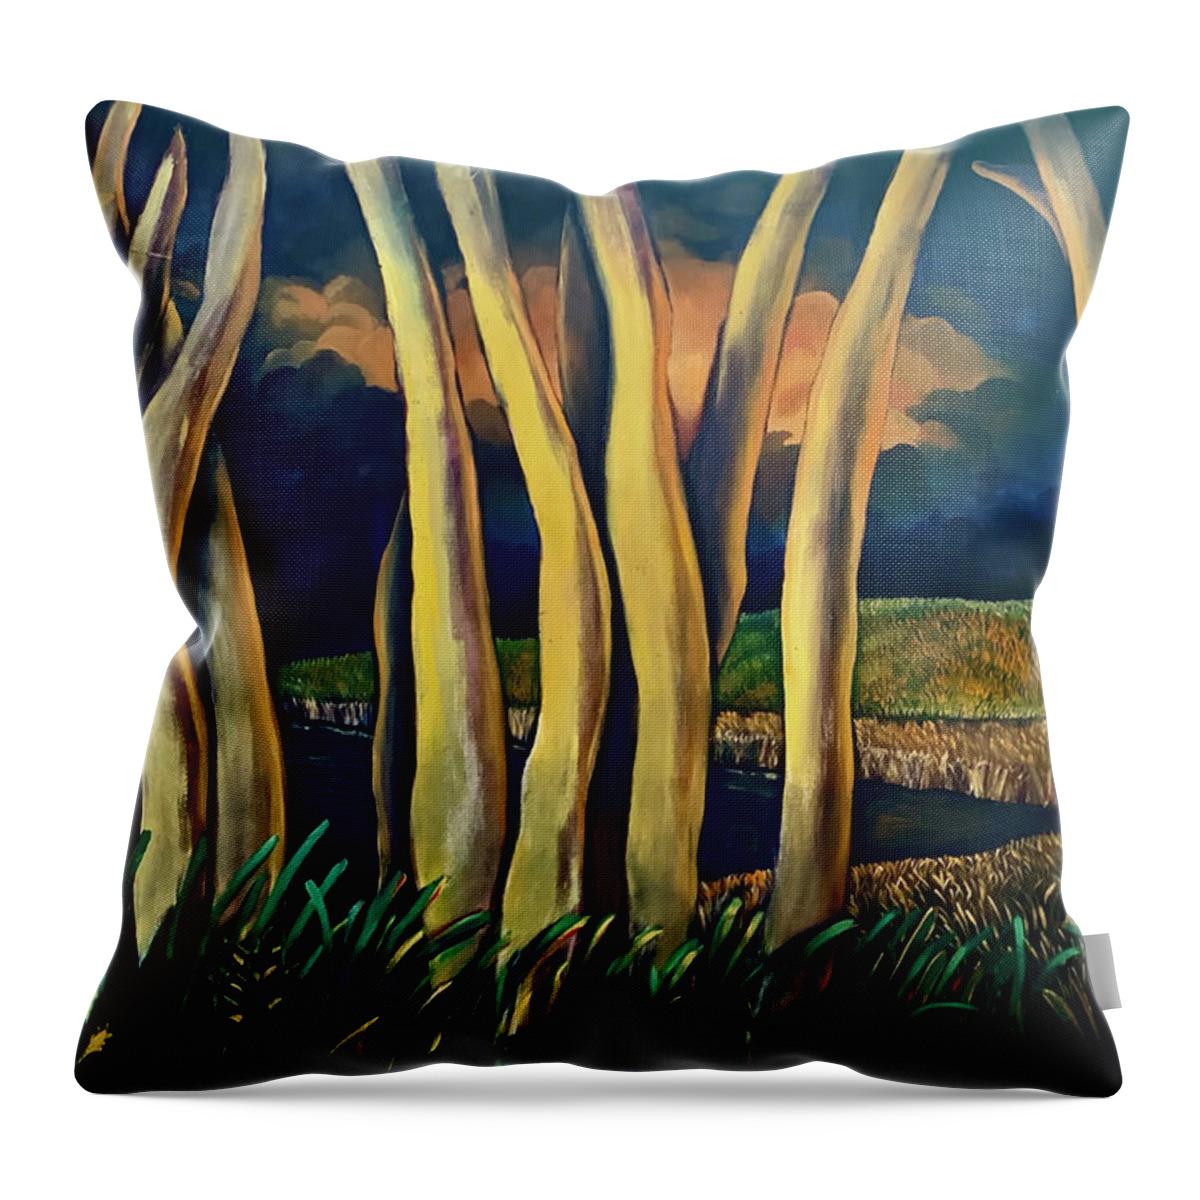 Orange Throw Pillow featuring the painting By The Lake #1 by Franci Hepburn